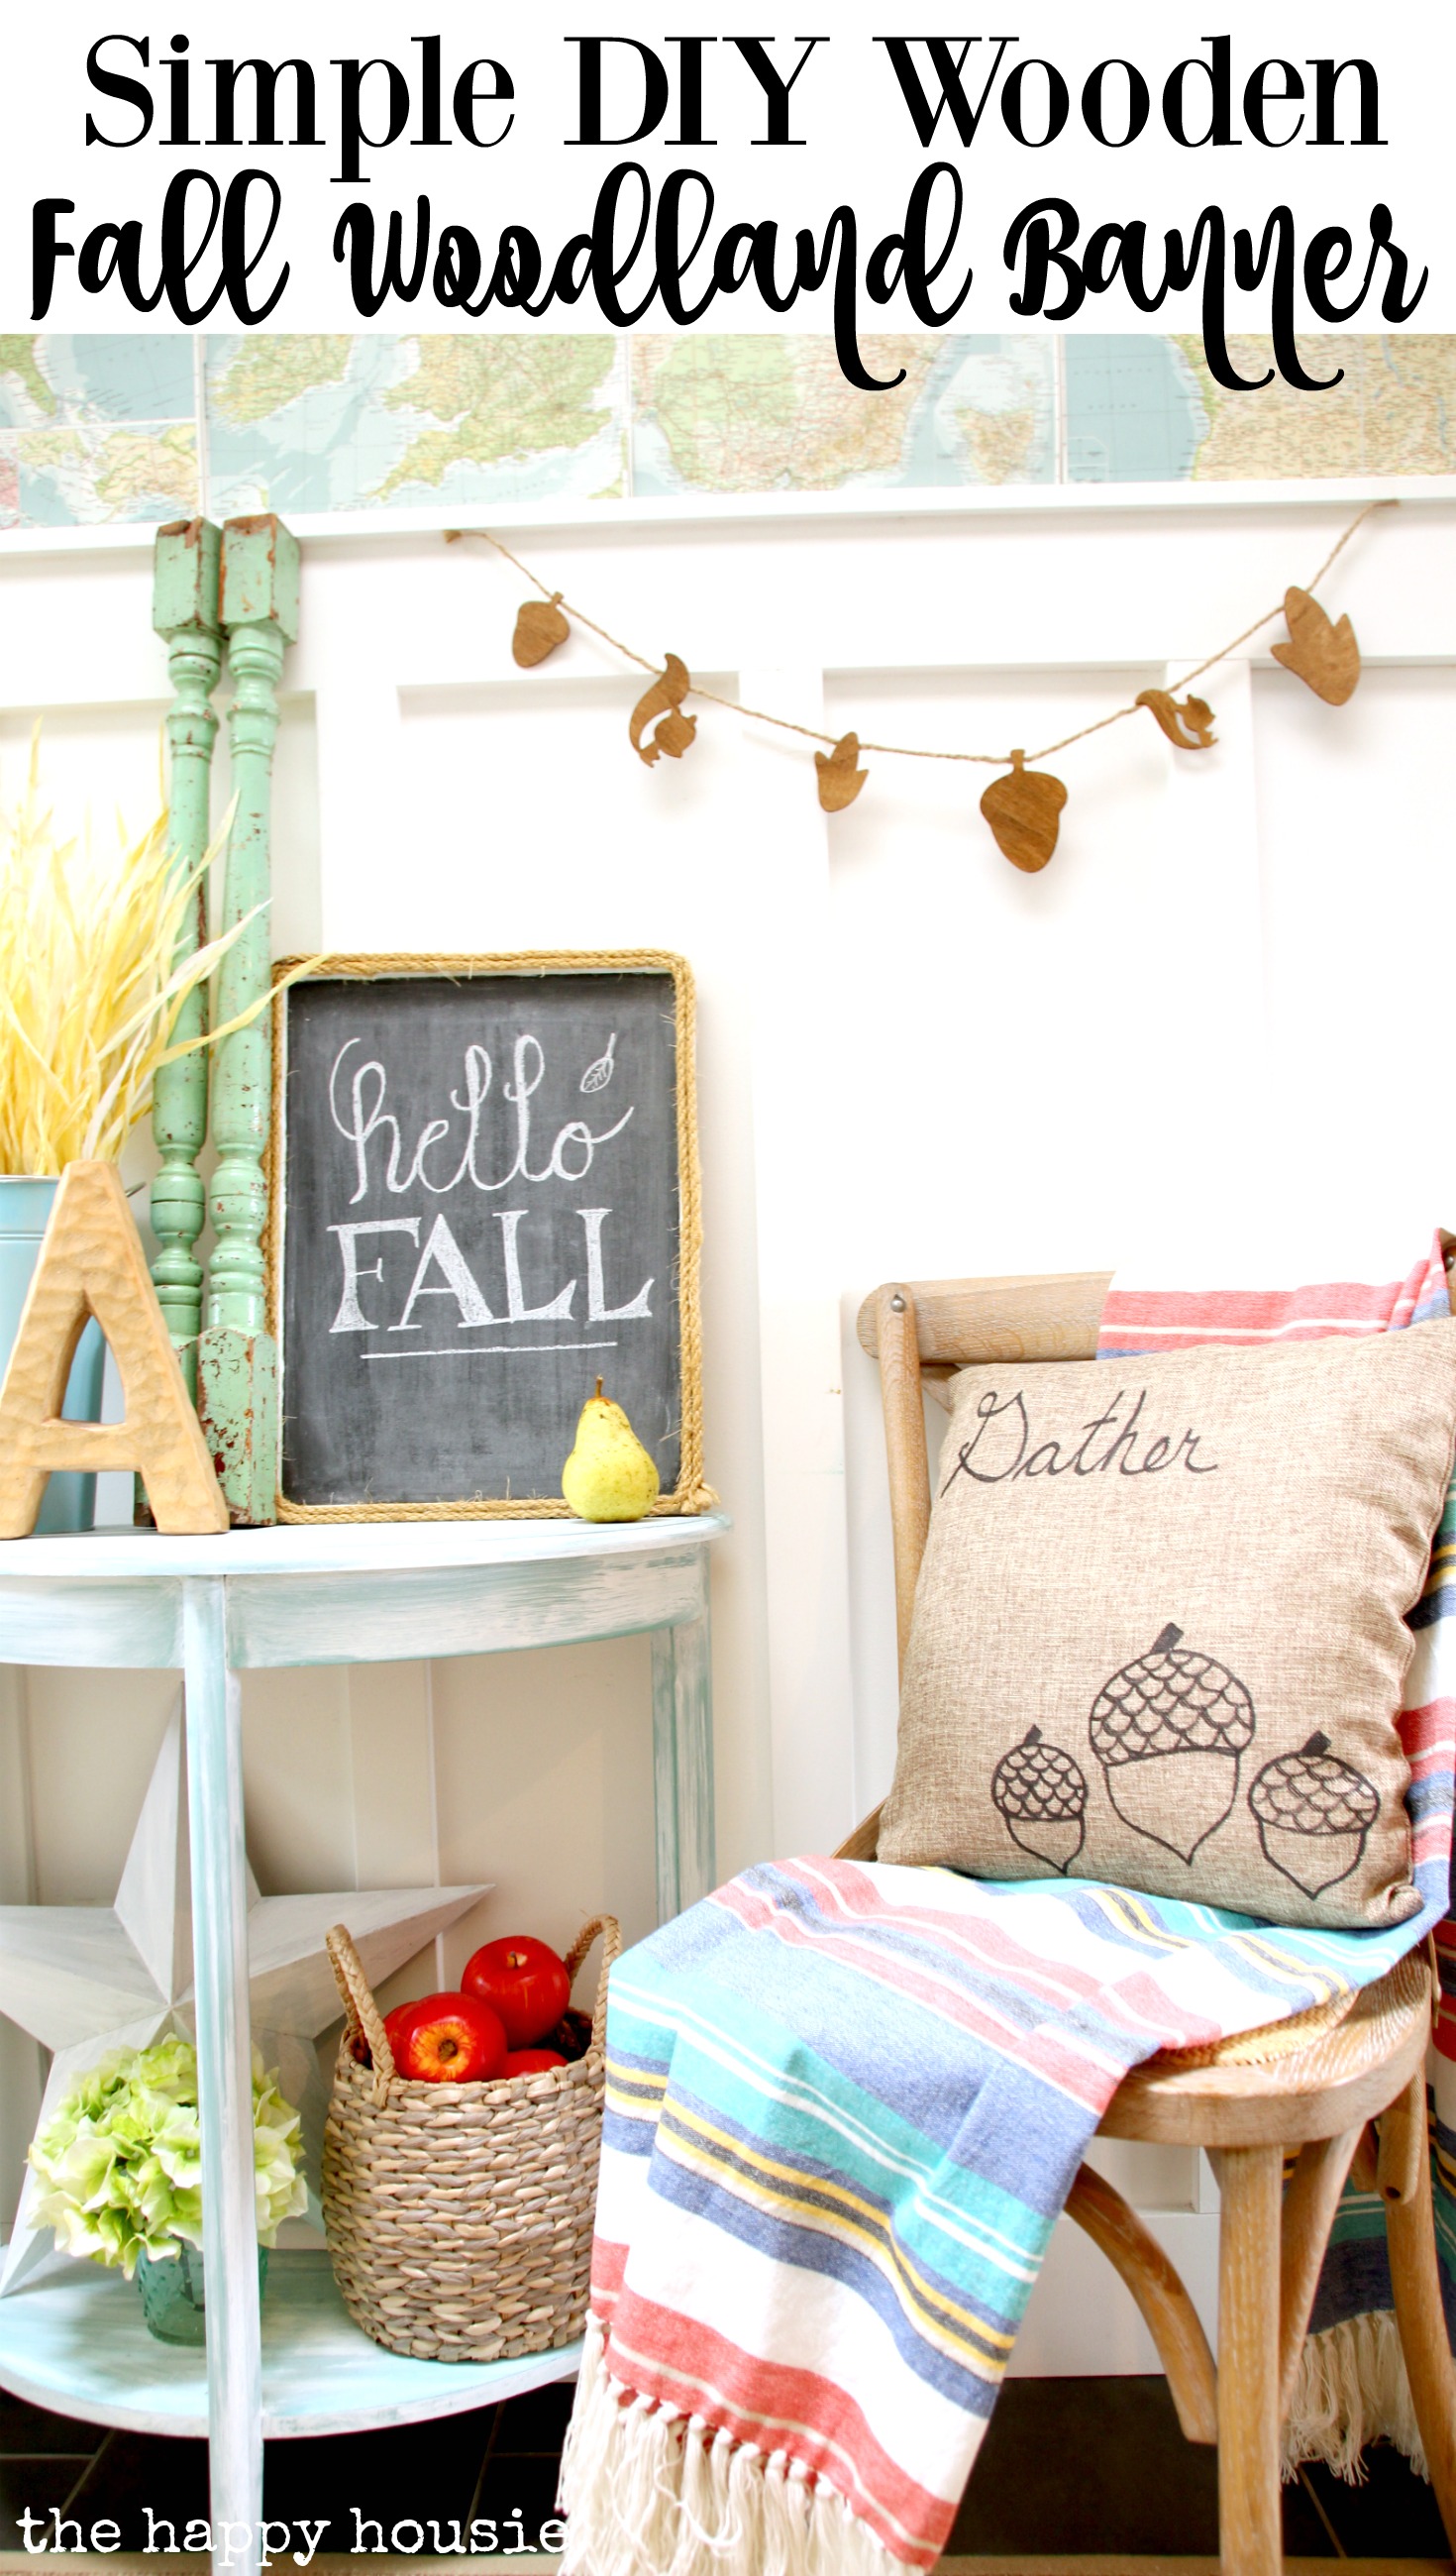 Simple DIY wooden fall woodland banner graphic.